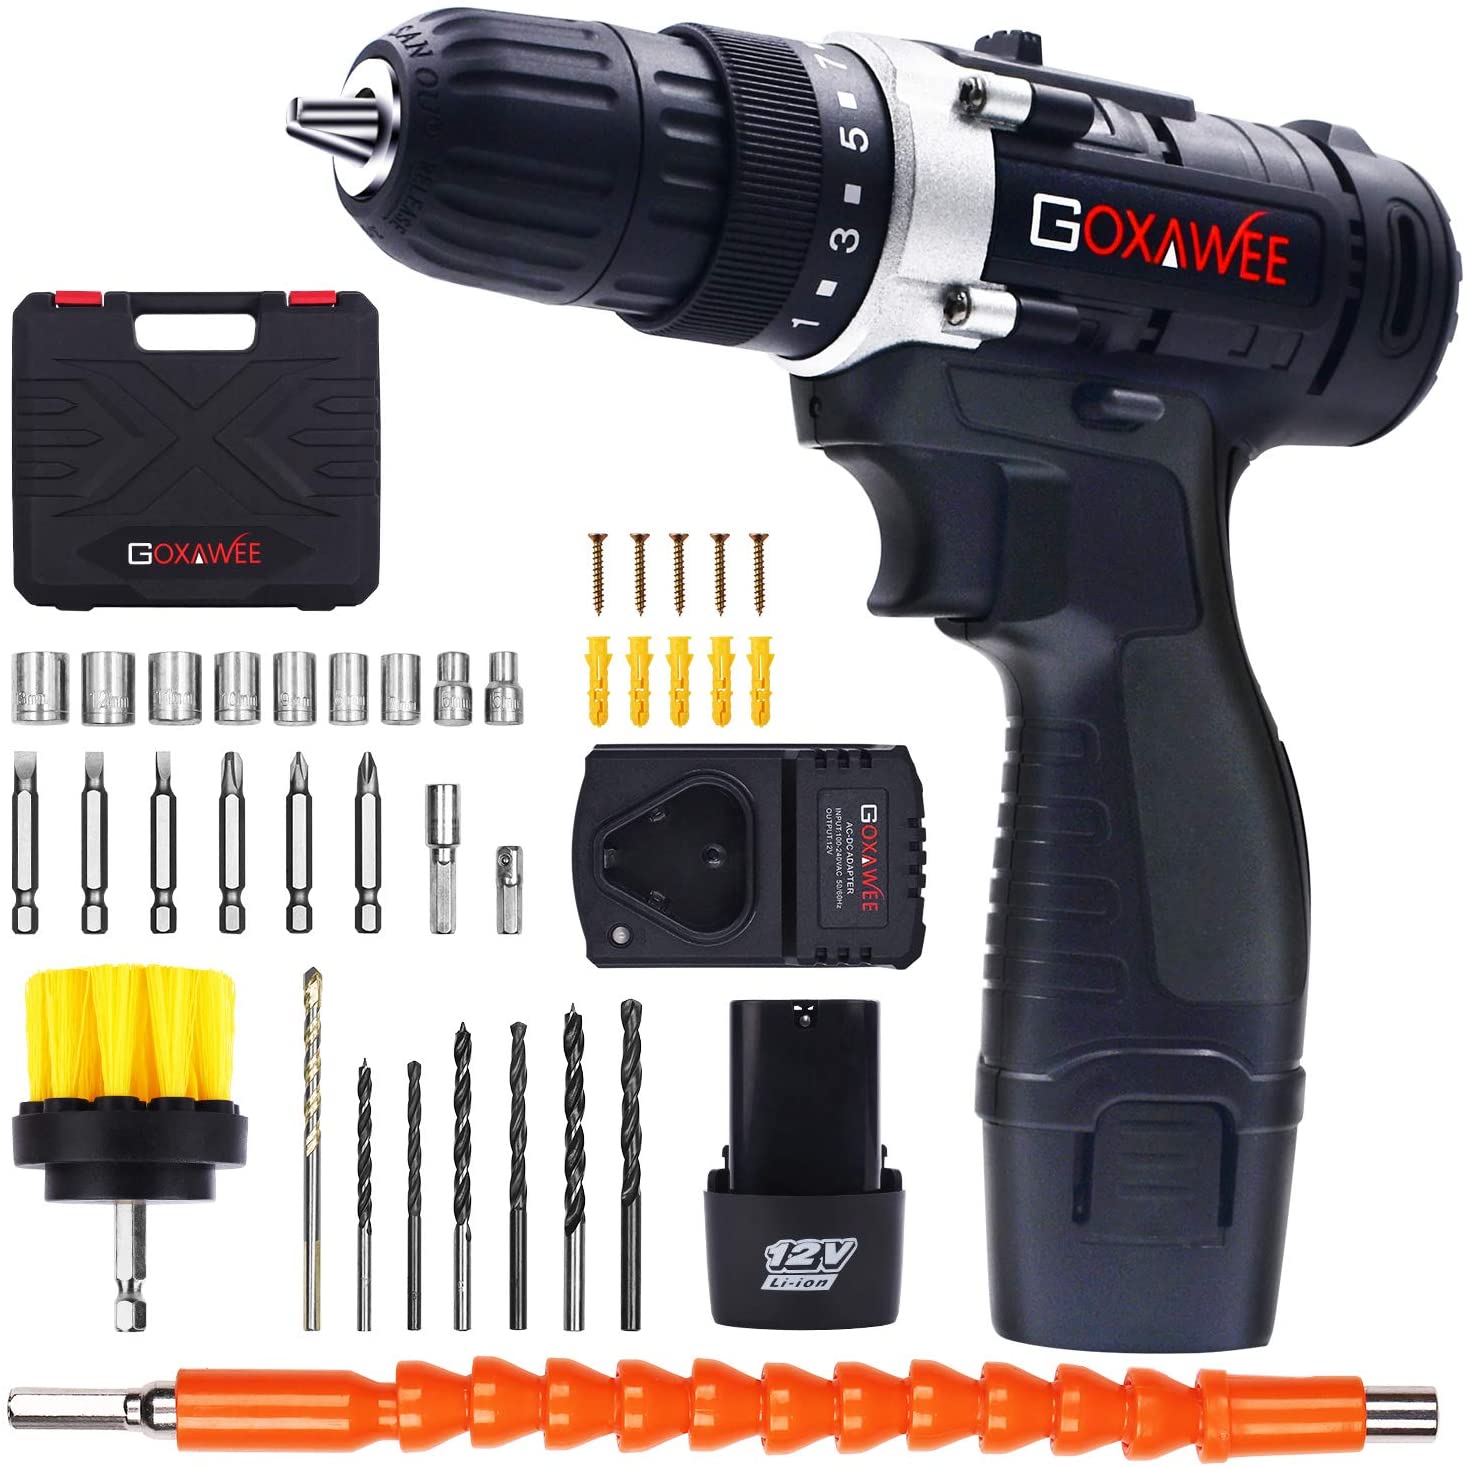 Cordless Drill with 2 Batteries - GOXAWEE Electric Screw Driver Set 100pcs (Max Torque 30Nm, 2-Speed, 10mm Automatic Chuck) for Home Improvement & DIY Project